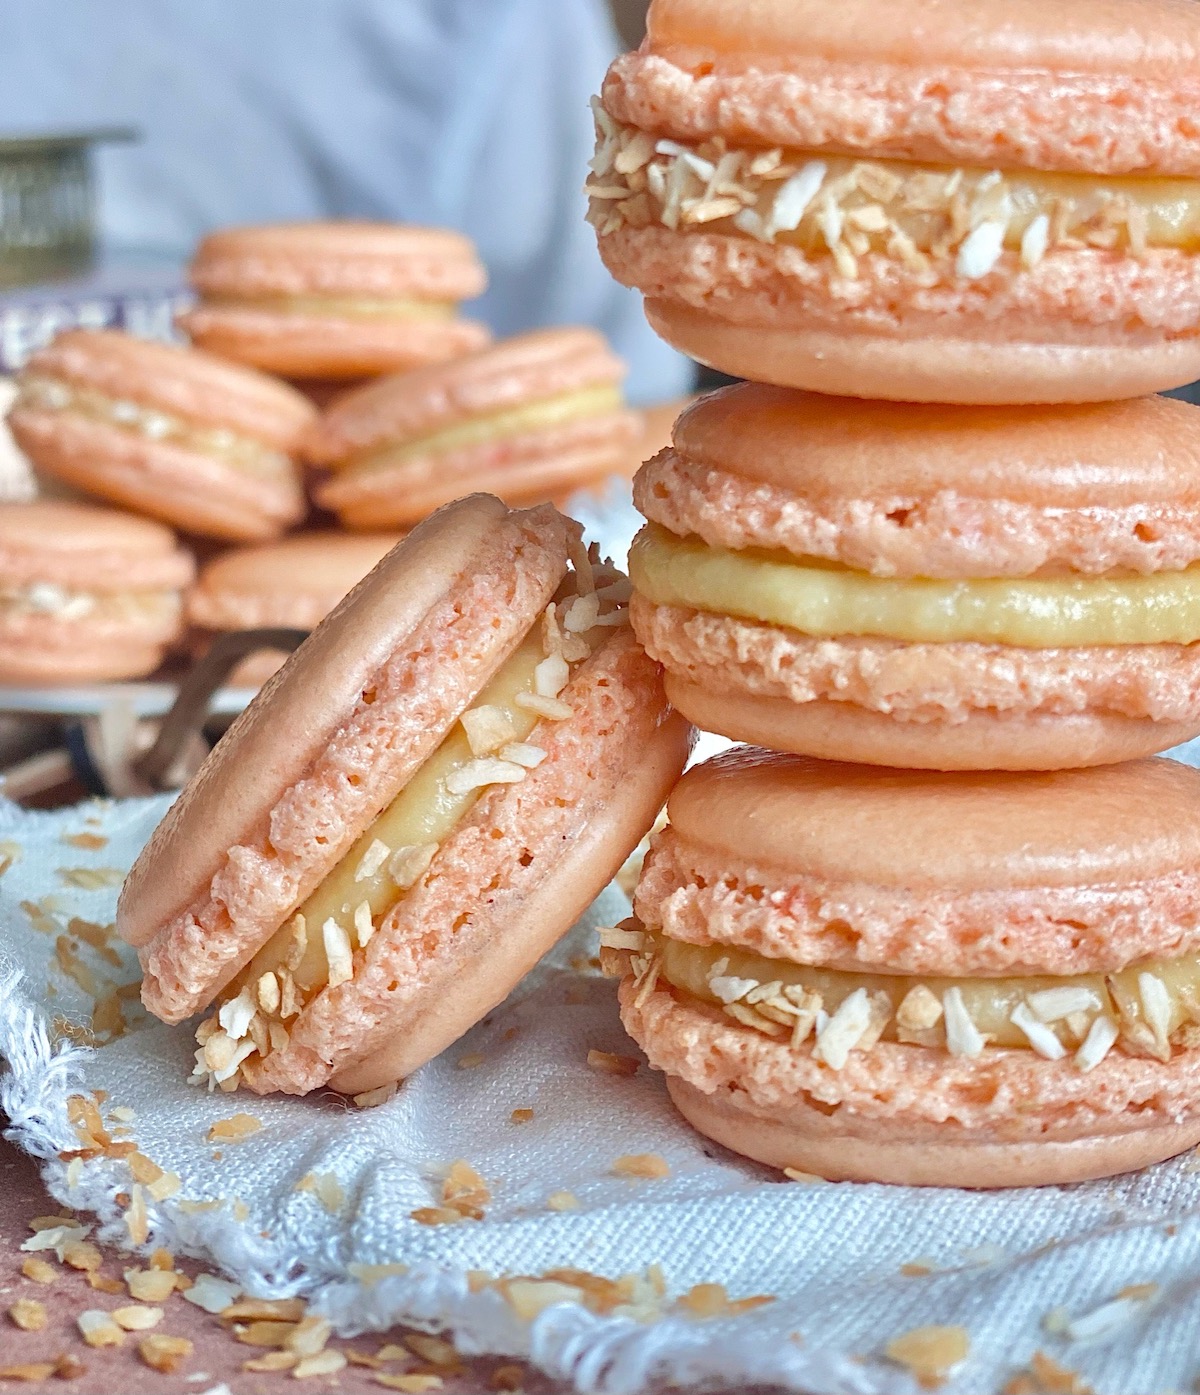 Mouthwatering Passionfruit Macarons